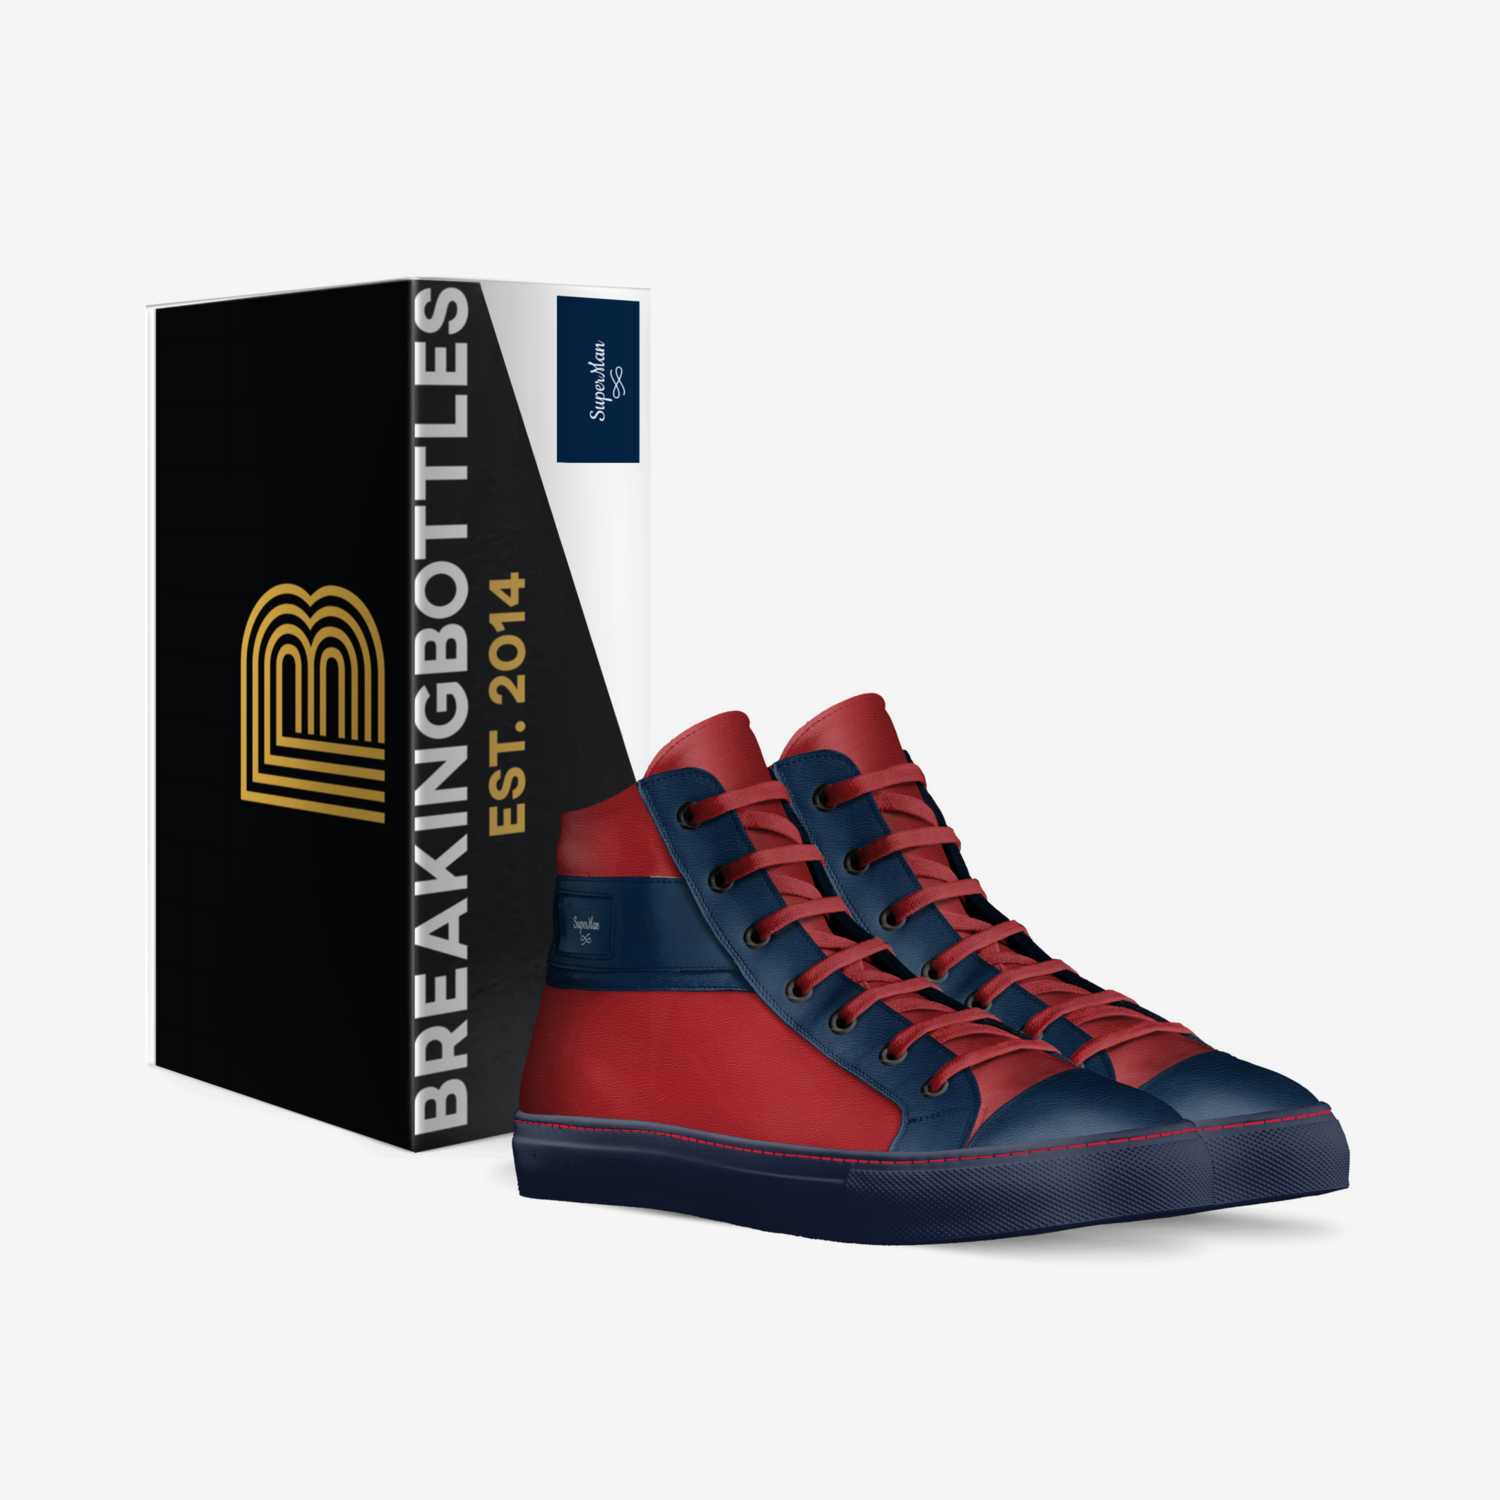 SuperMan custom made in Italy shoes by Nicole Pascale | Box view